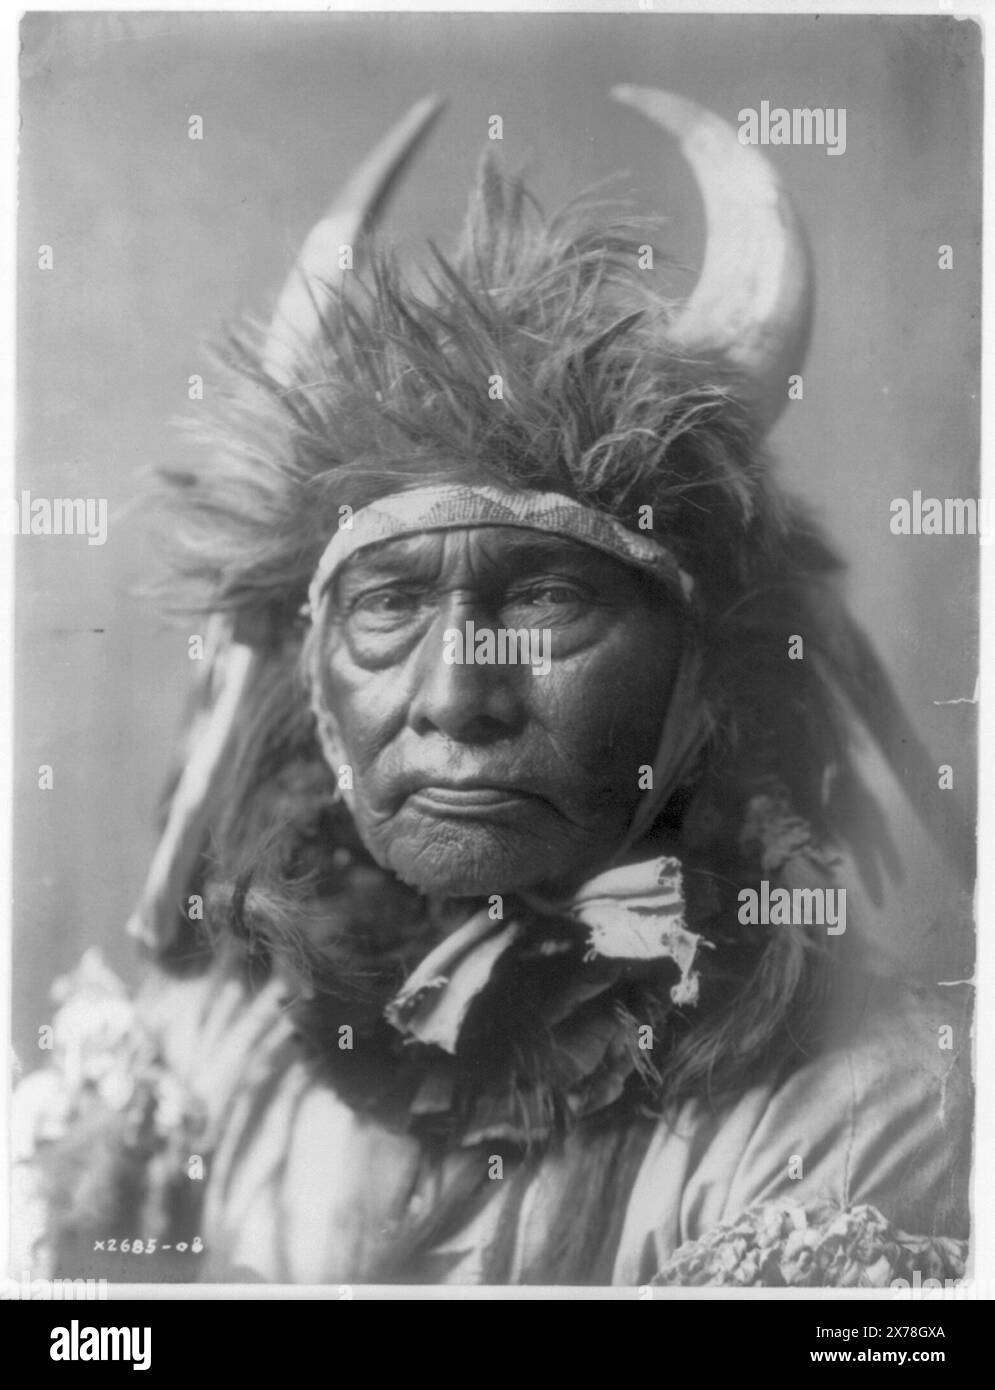 Bull Chief Apsaroke, Curtis no. 2685-08., Forms part of: Edward S. Curtis Collection ., Published in: The North American Indian / Edward S. Curtis. [Seattle, Wash.] : Edward S. Curtis, 1907-30, Suppl., v. 4, pl. 128.. Indians of North America, 1900-1910. , Crow Indians, 1900-1910. , Headdresses, 1900-1910. , Horns (Anatomy), 1900-1910. Stock Photo